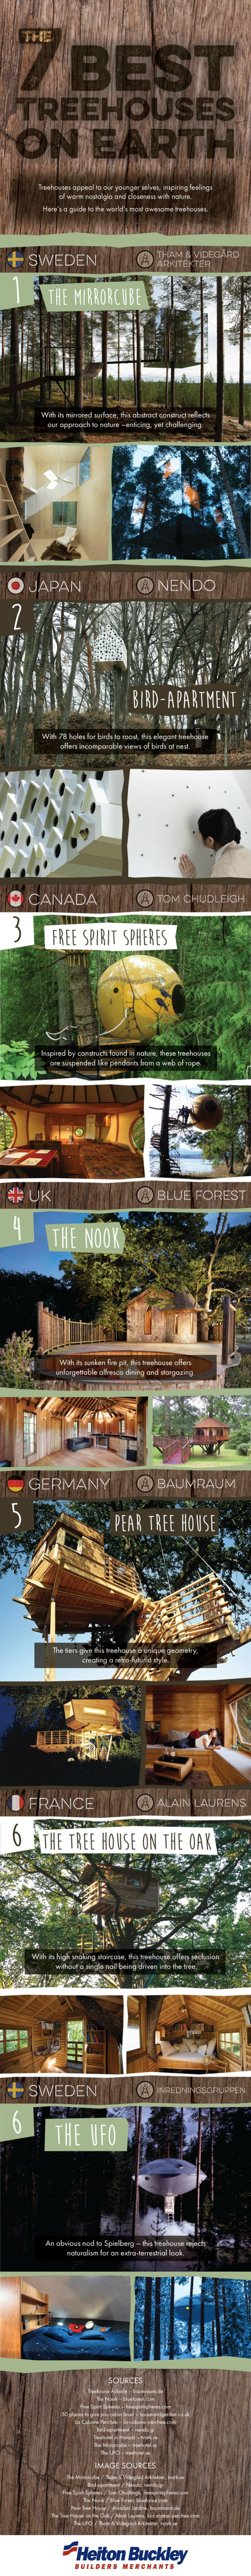 Infographic: 7 Best Treehouses on Earth